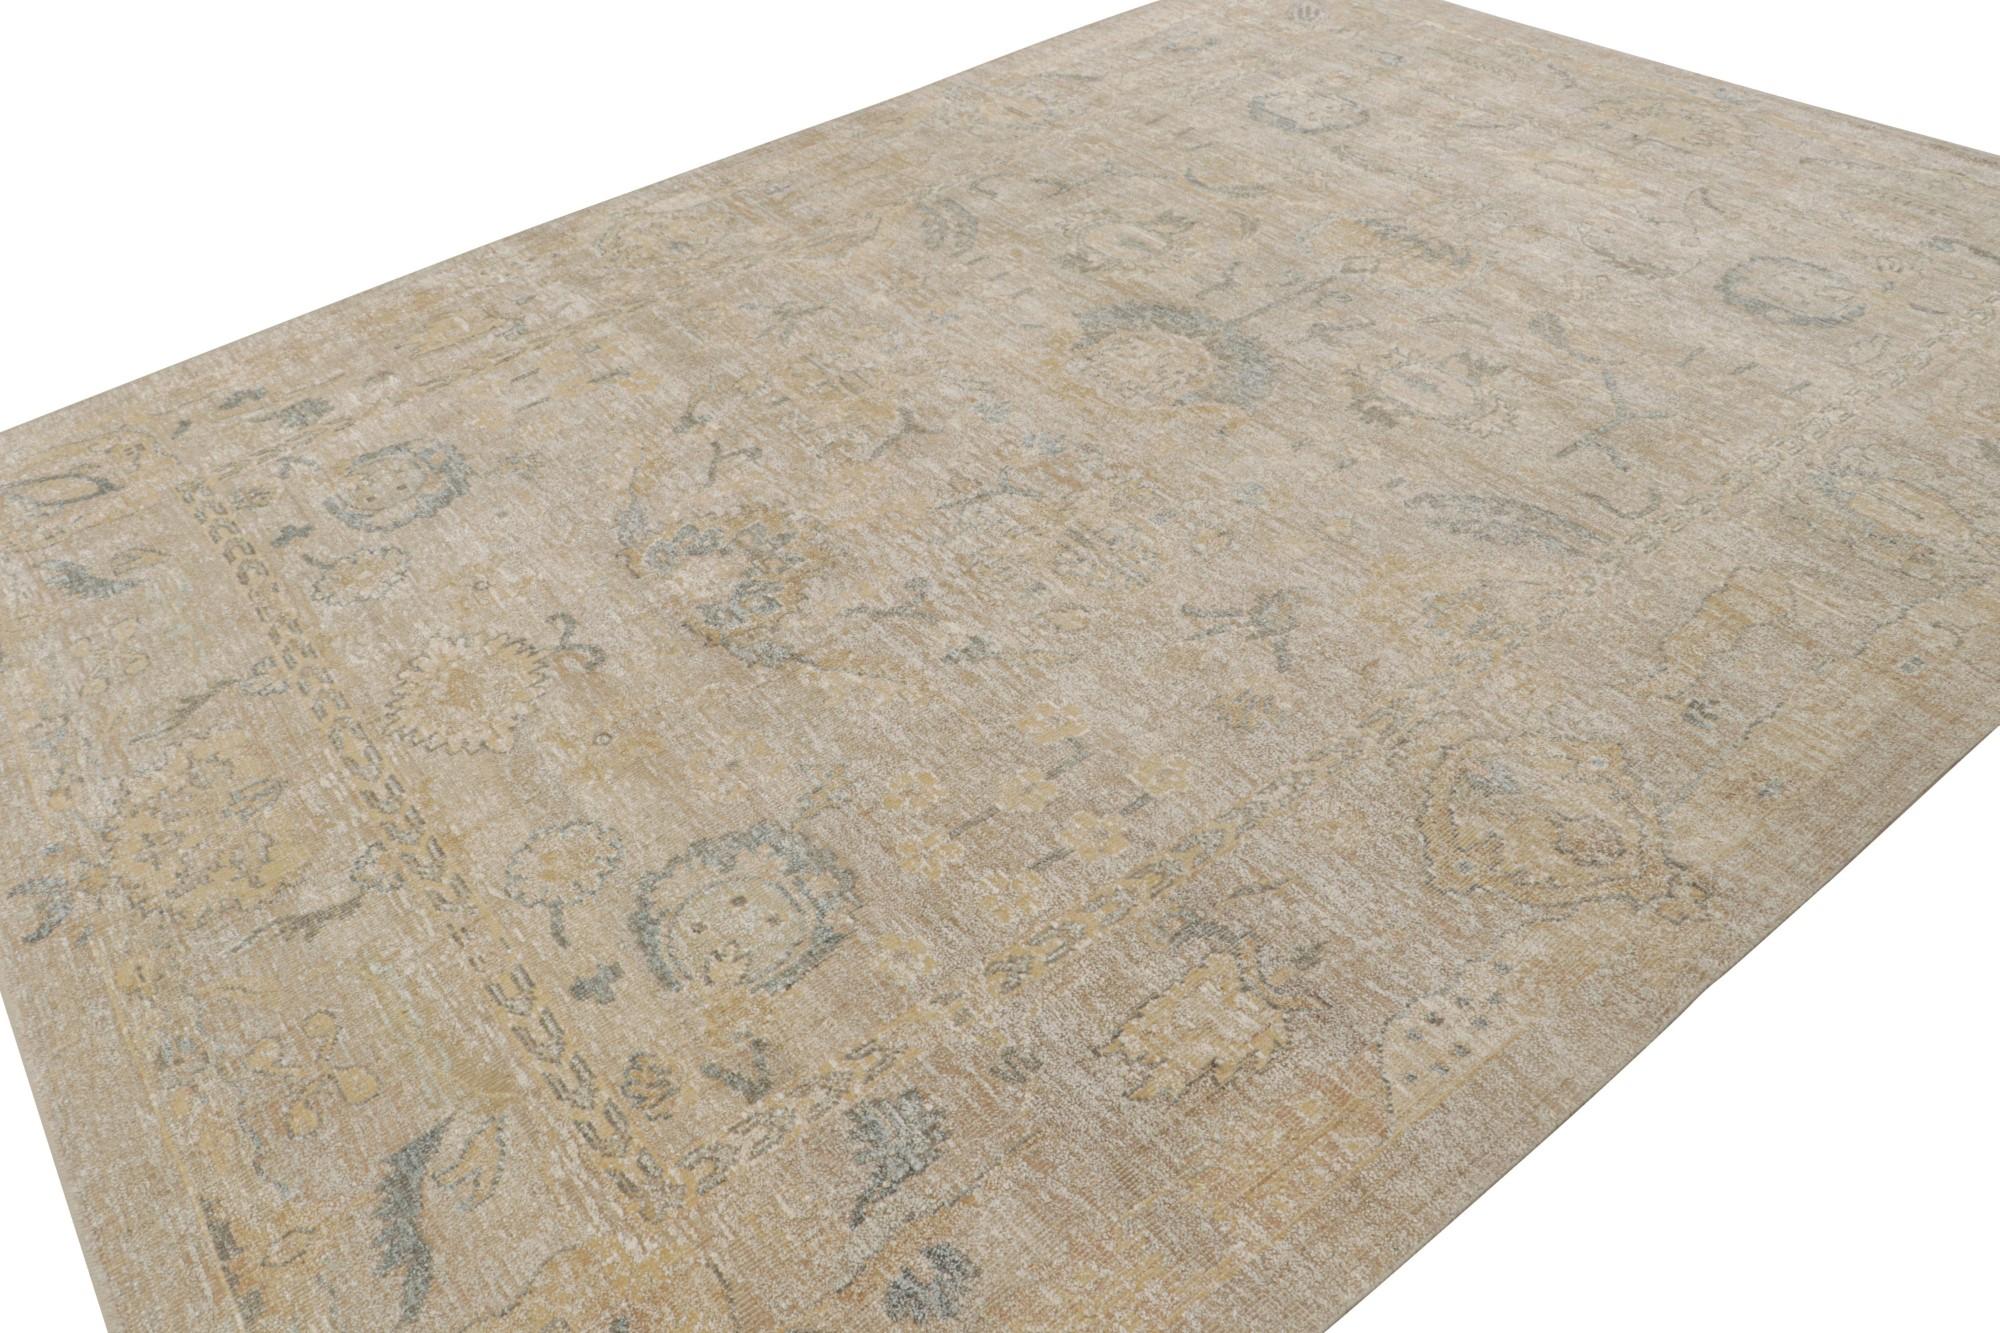 This 9x12 rug from the Modern Classics Collection by Rug & Kilim is from a new line inspired by antique Oushak rugs. Hand-knotted in wool & sari silk, its design enjoys beige, gold & gray floral patterns.  

On the Design: 

The rug is made with a